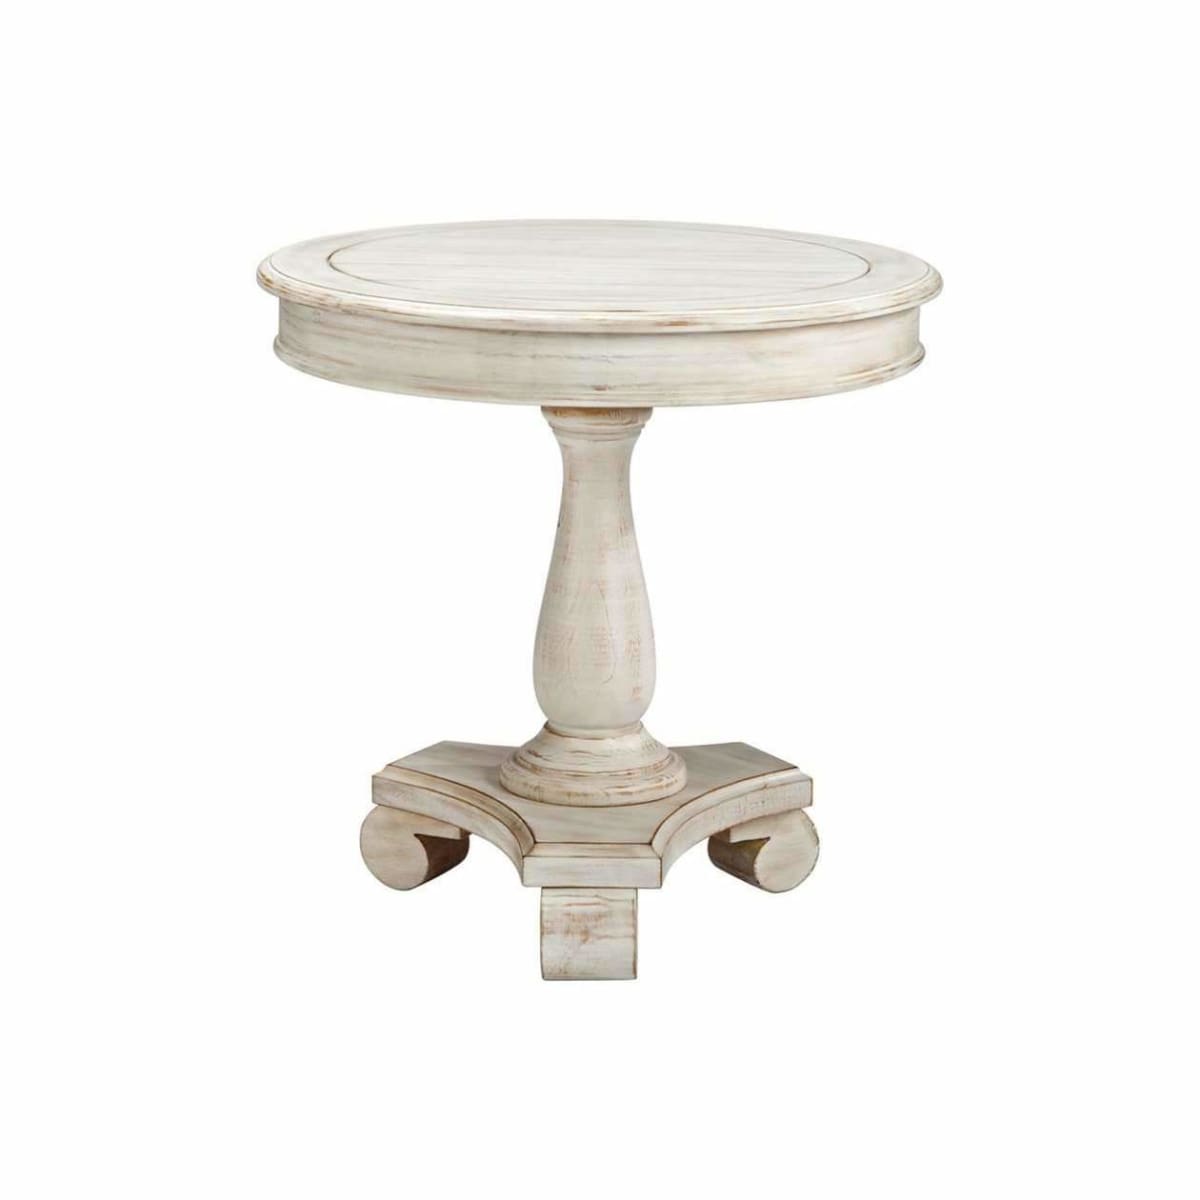 Mirimyn Round Accent Table - END TABLE/SIDE TABLE